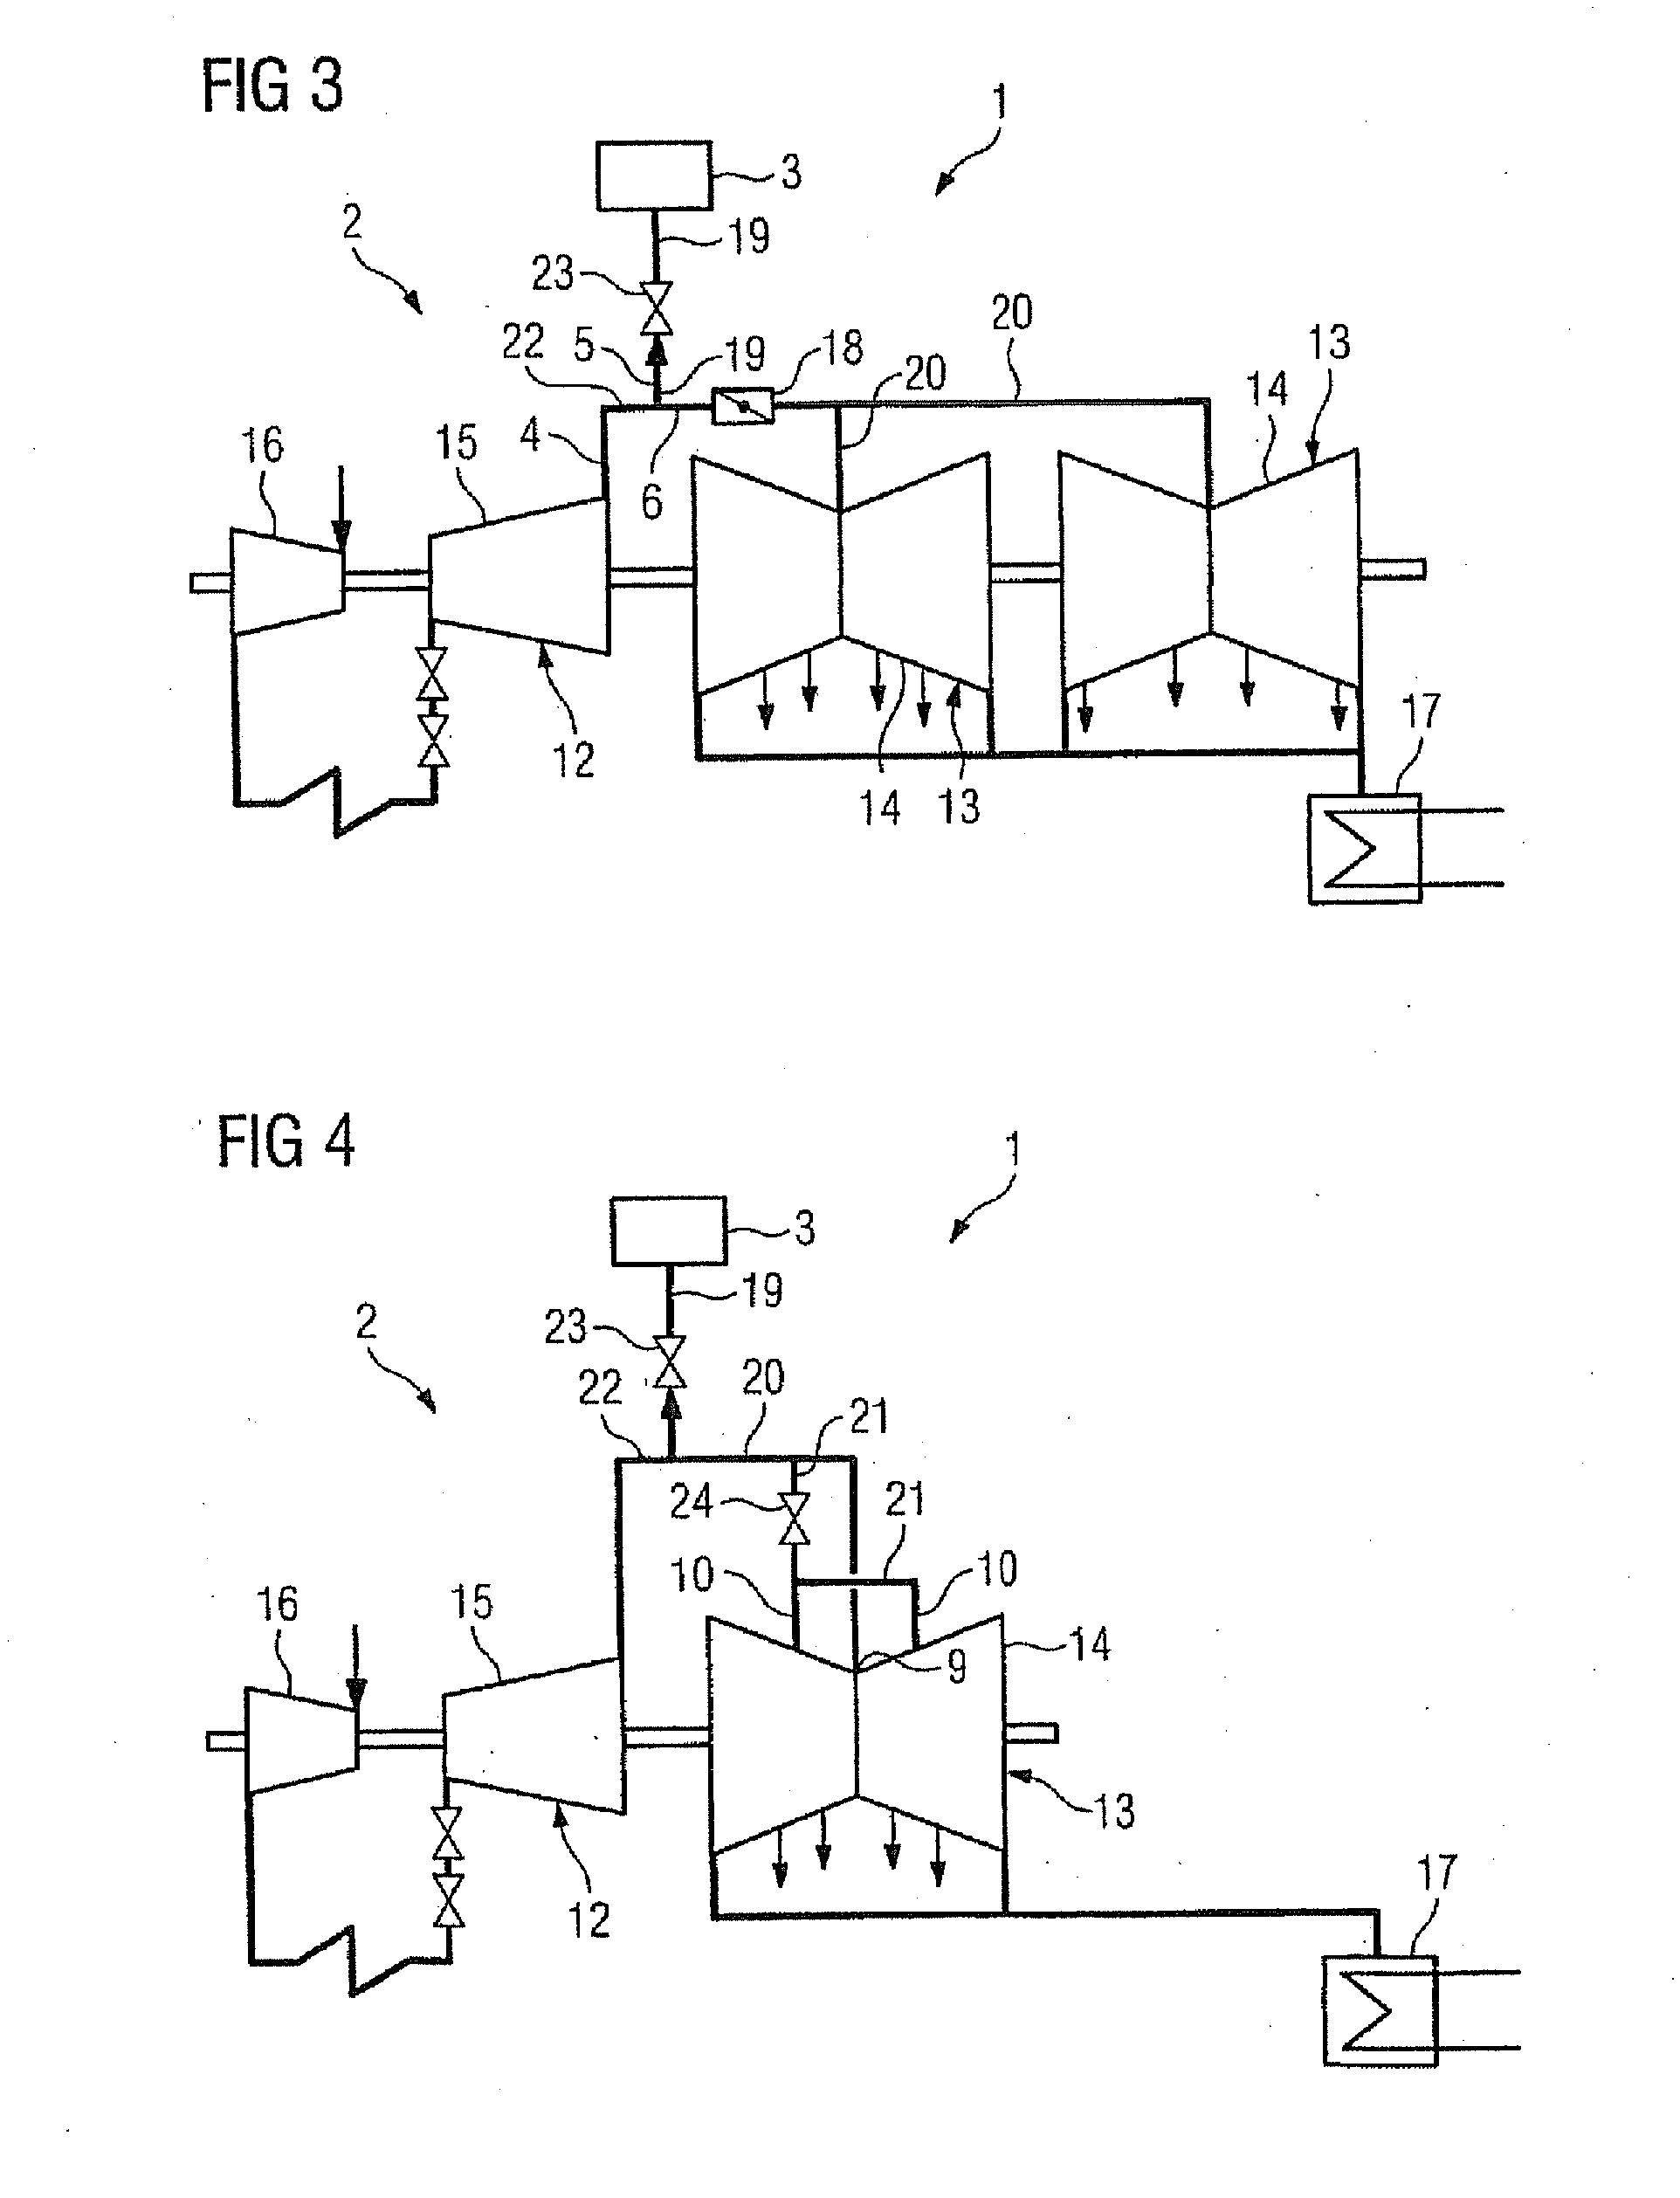 Method and Device for Operating a Steam Power Station Comprising a Steam Turbine and a Process Steam Consumer